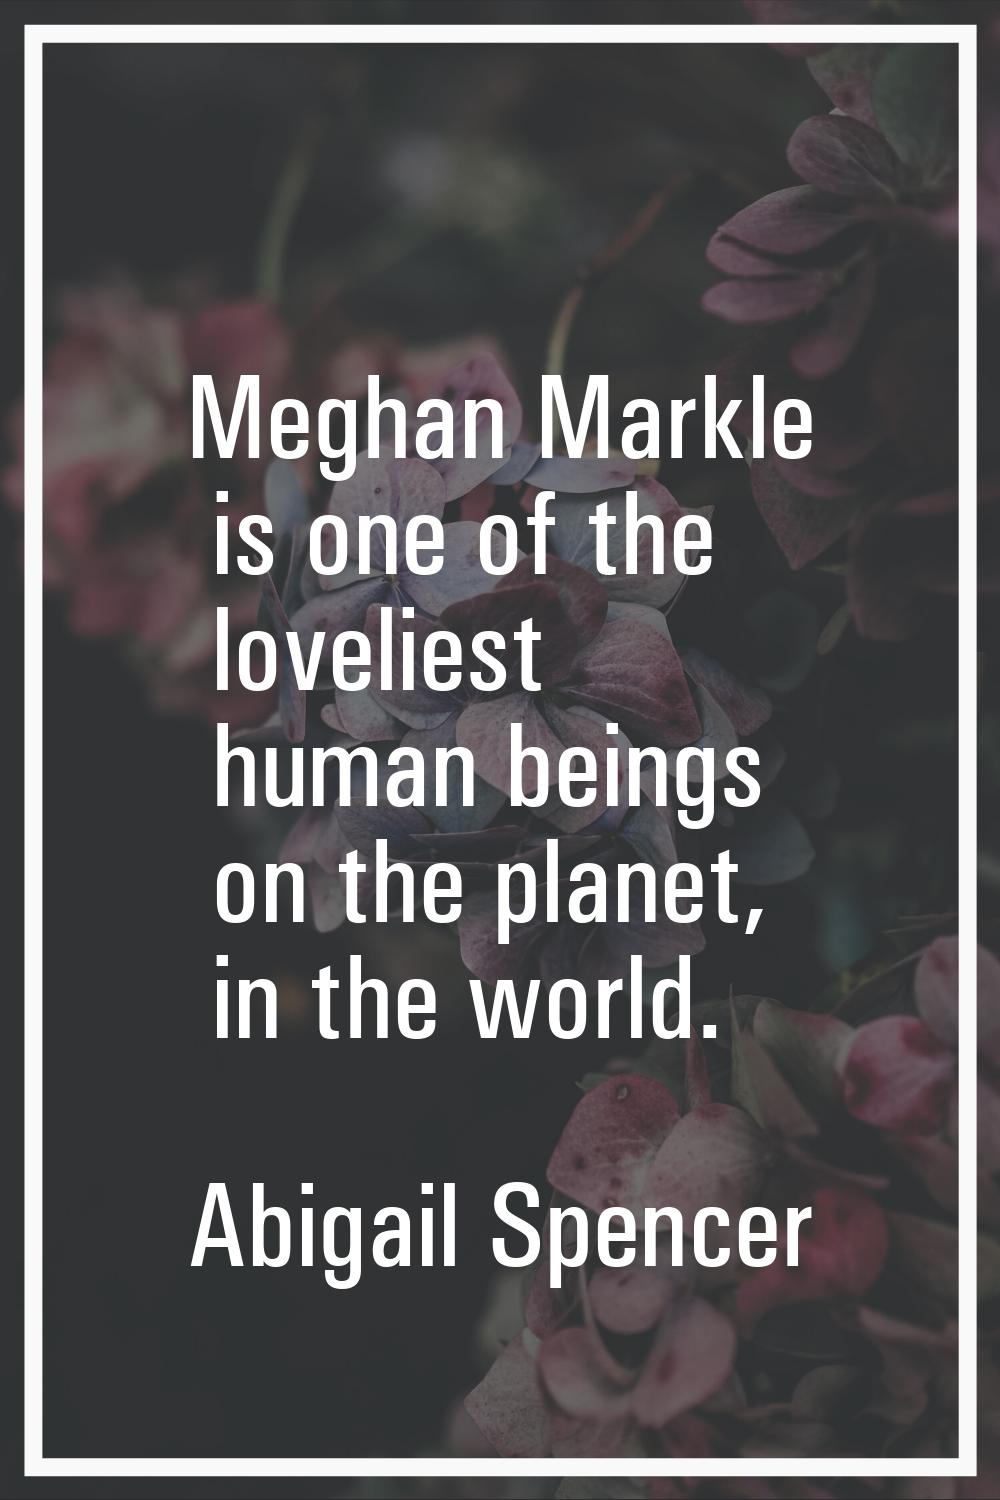 Meghan Markle is one of the loveliest human beings on the planet, in the world.